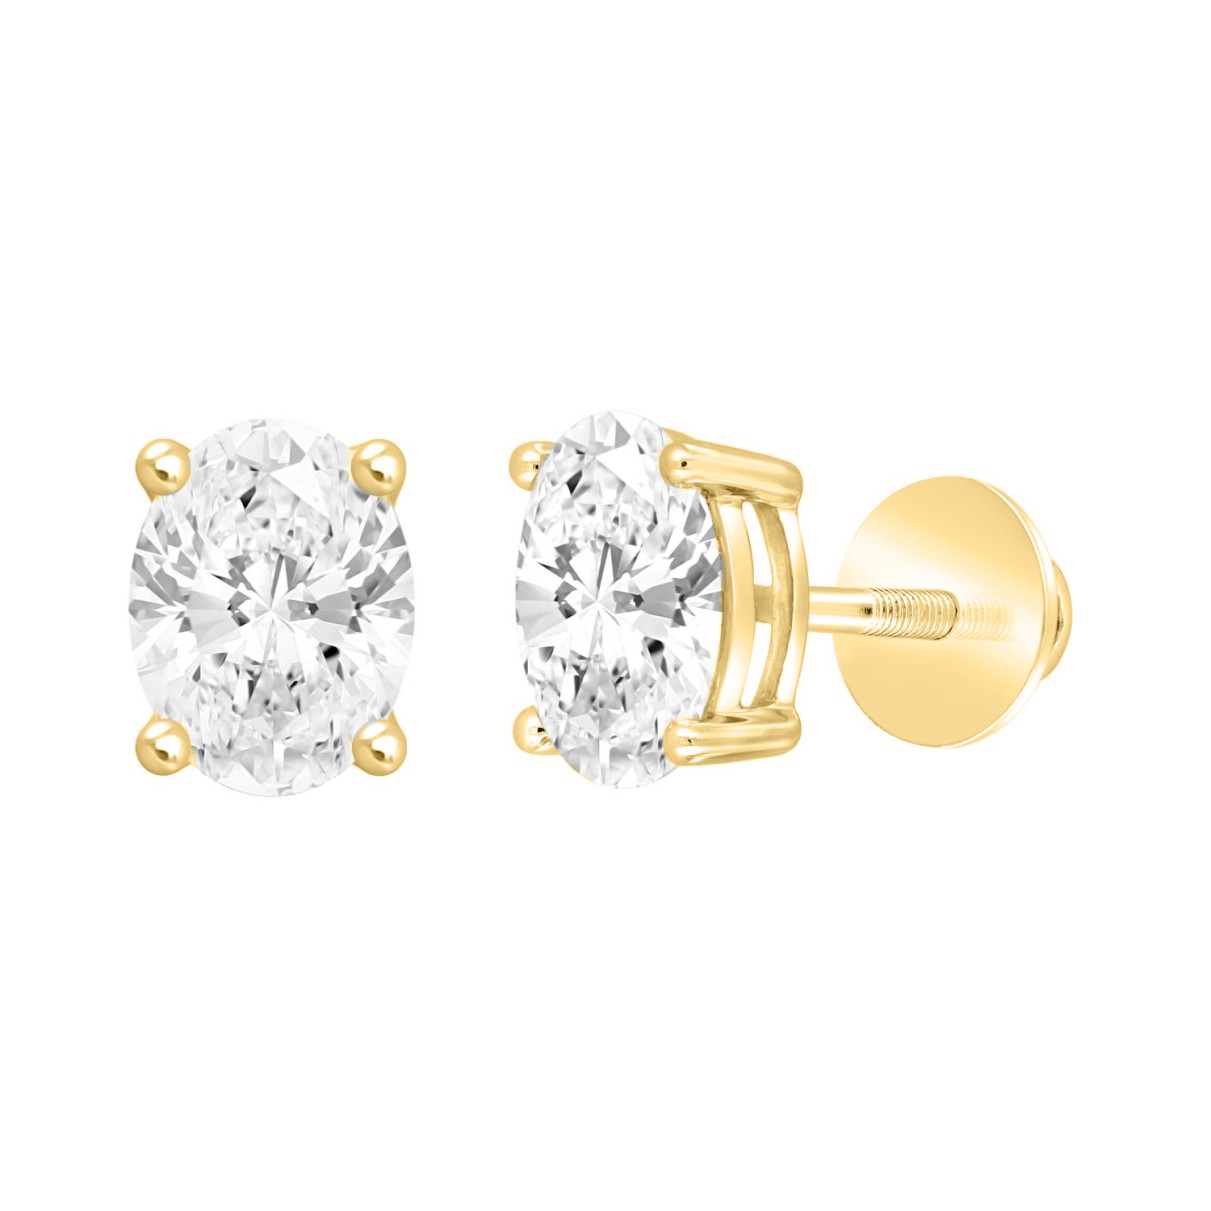 LADIES SOLITAIRE EARRINGS 3CT OVAL DIAMOND 14K YELLOW GOLD (CENTER STONE OVAL DIAMOND 1 1/2CT )